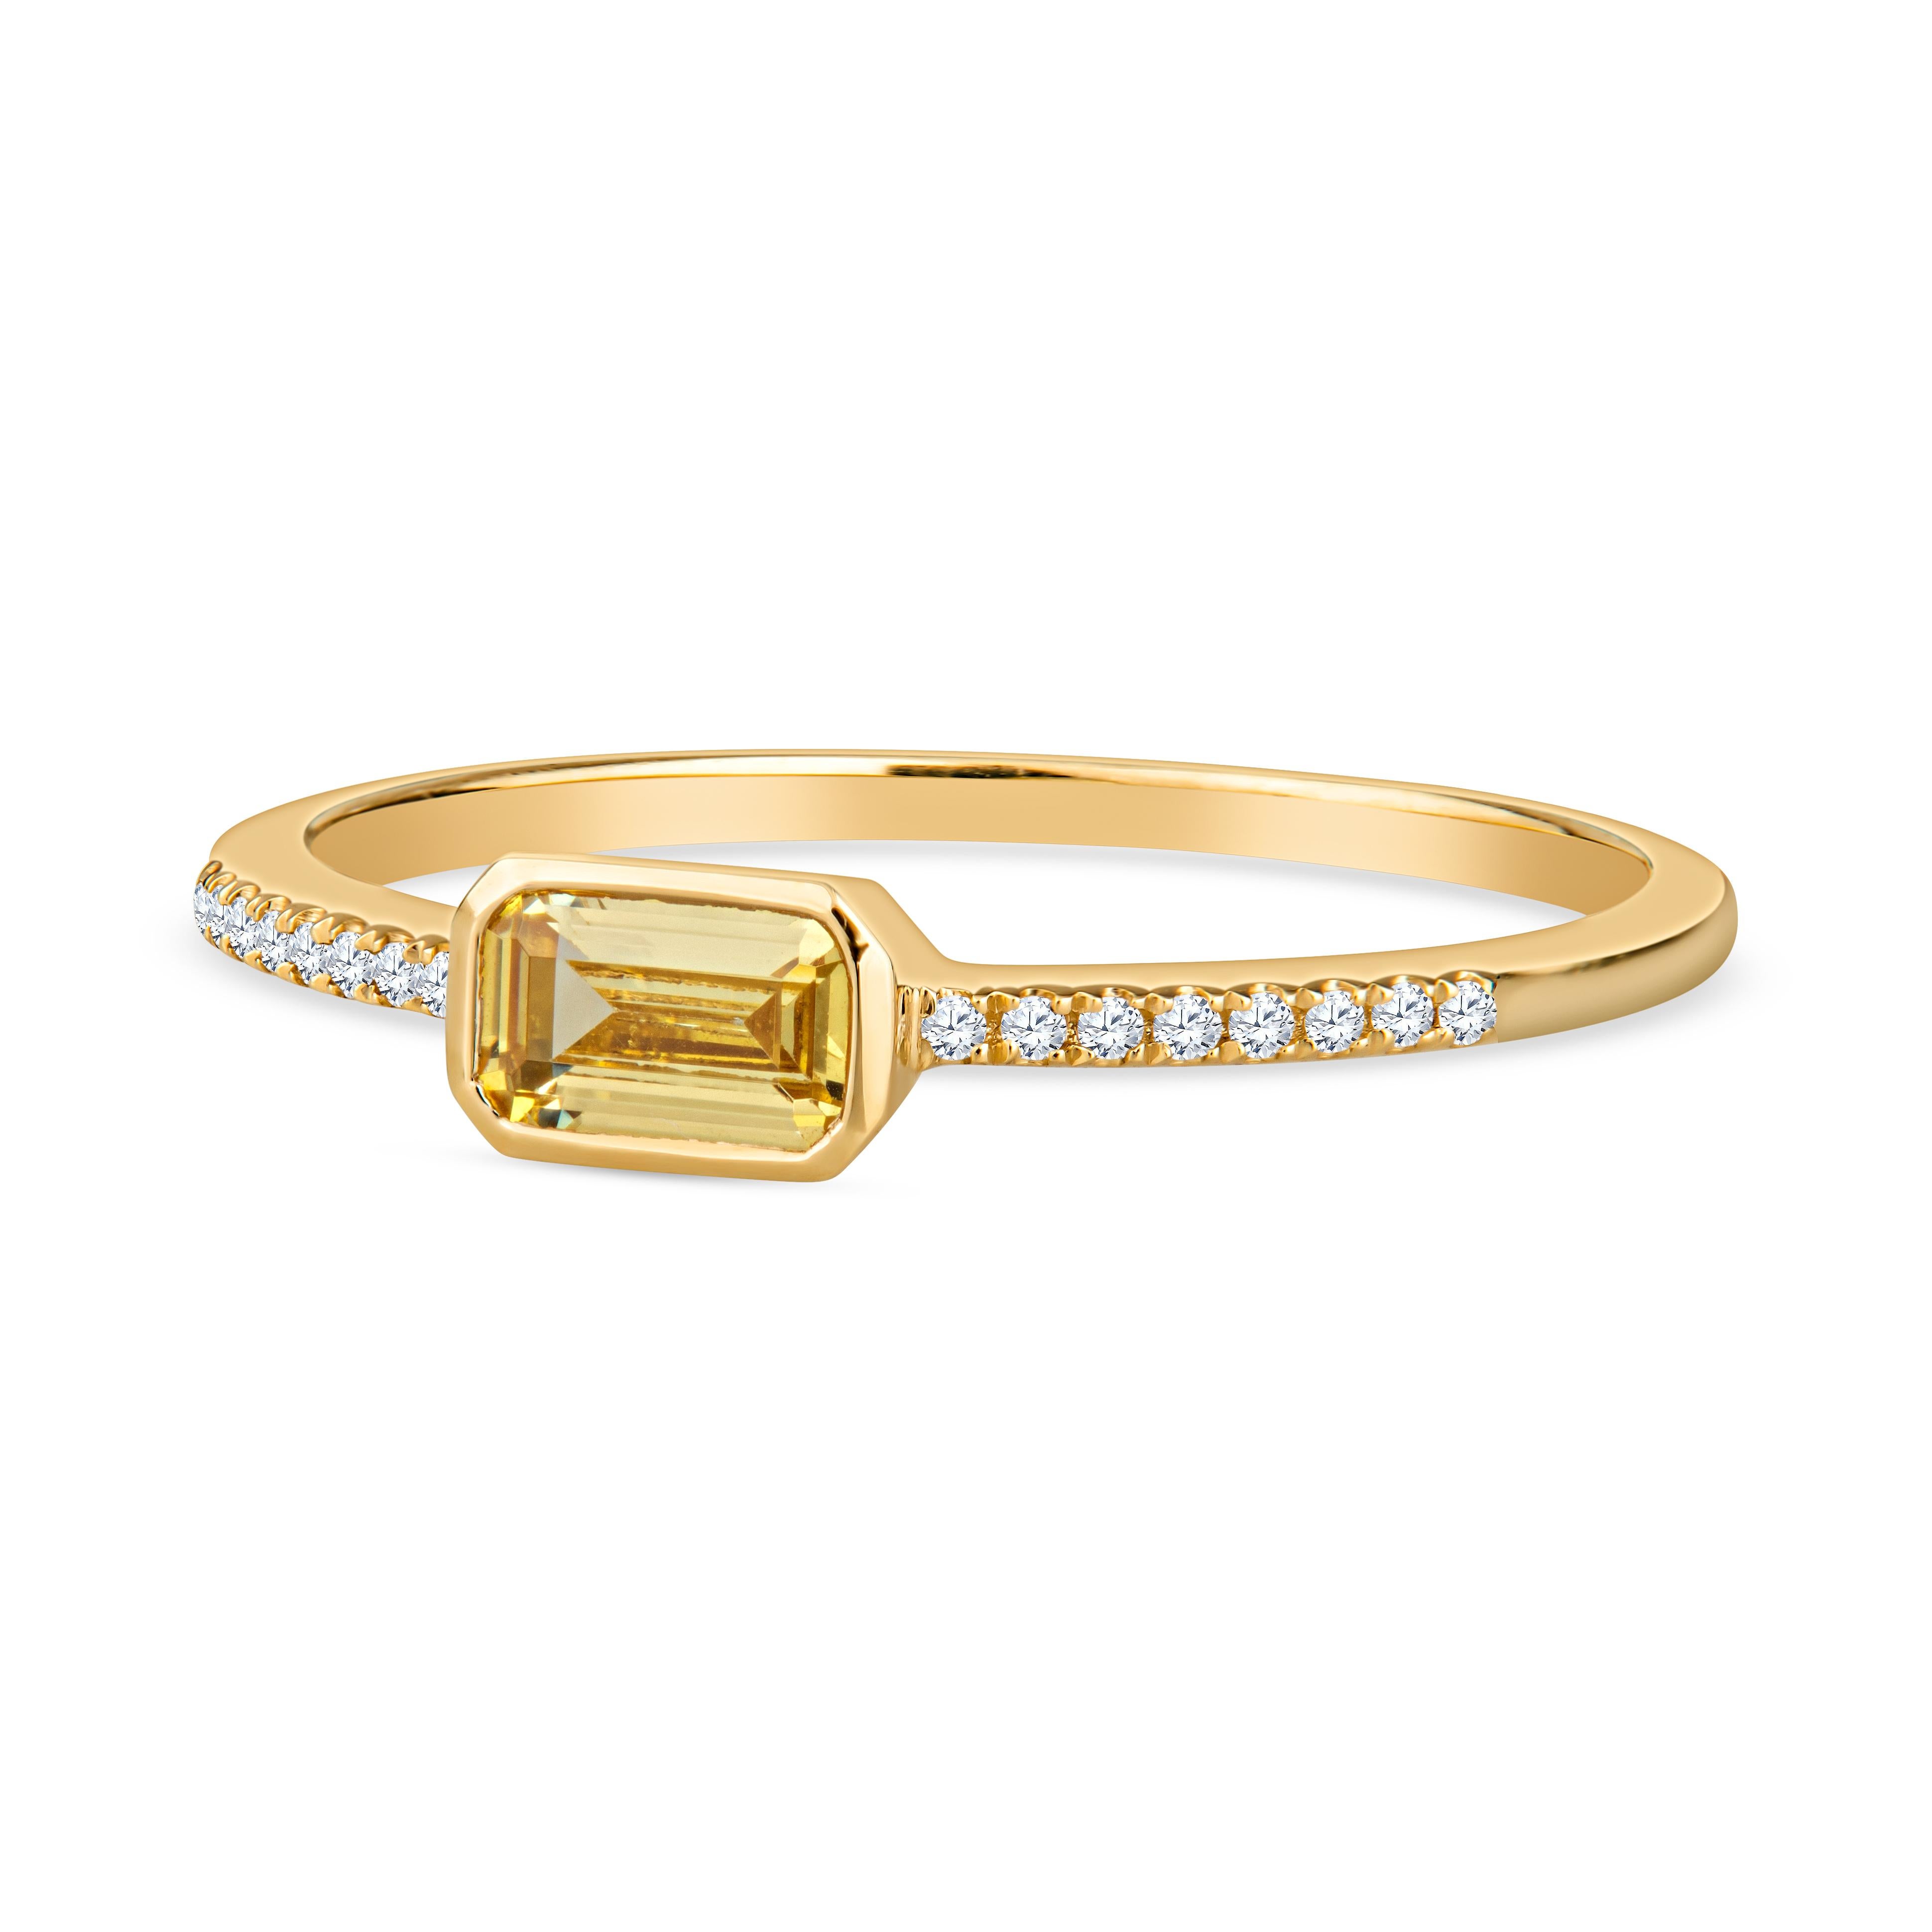 This dainty ring features a 0.46 carat emerald cut citrine set east-west accented by 0.04 carat total weight in round diamonds along the band set in 14 karat yellow gold. This ring is a size 6.5 but can resized upon request. Wear alone or stack with